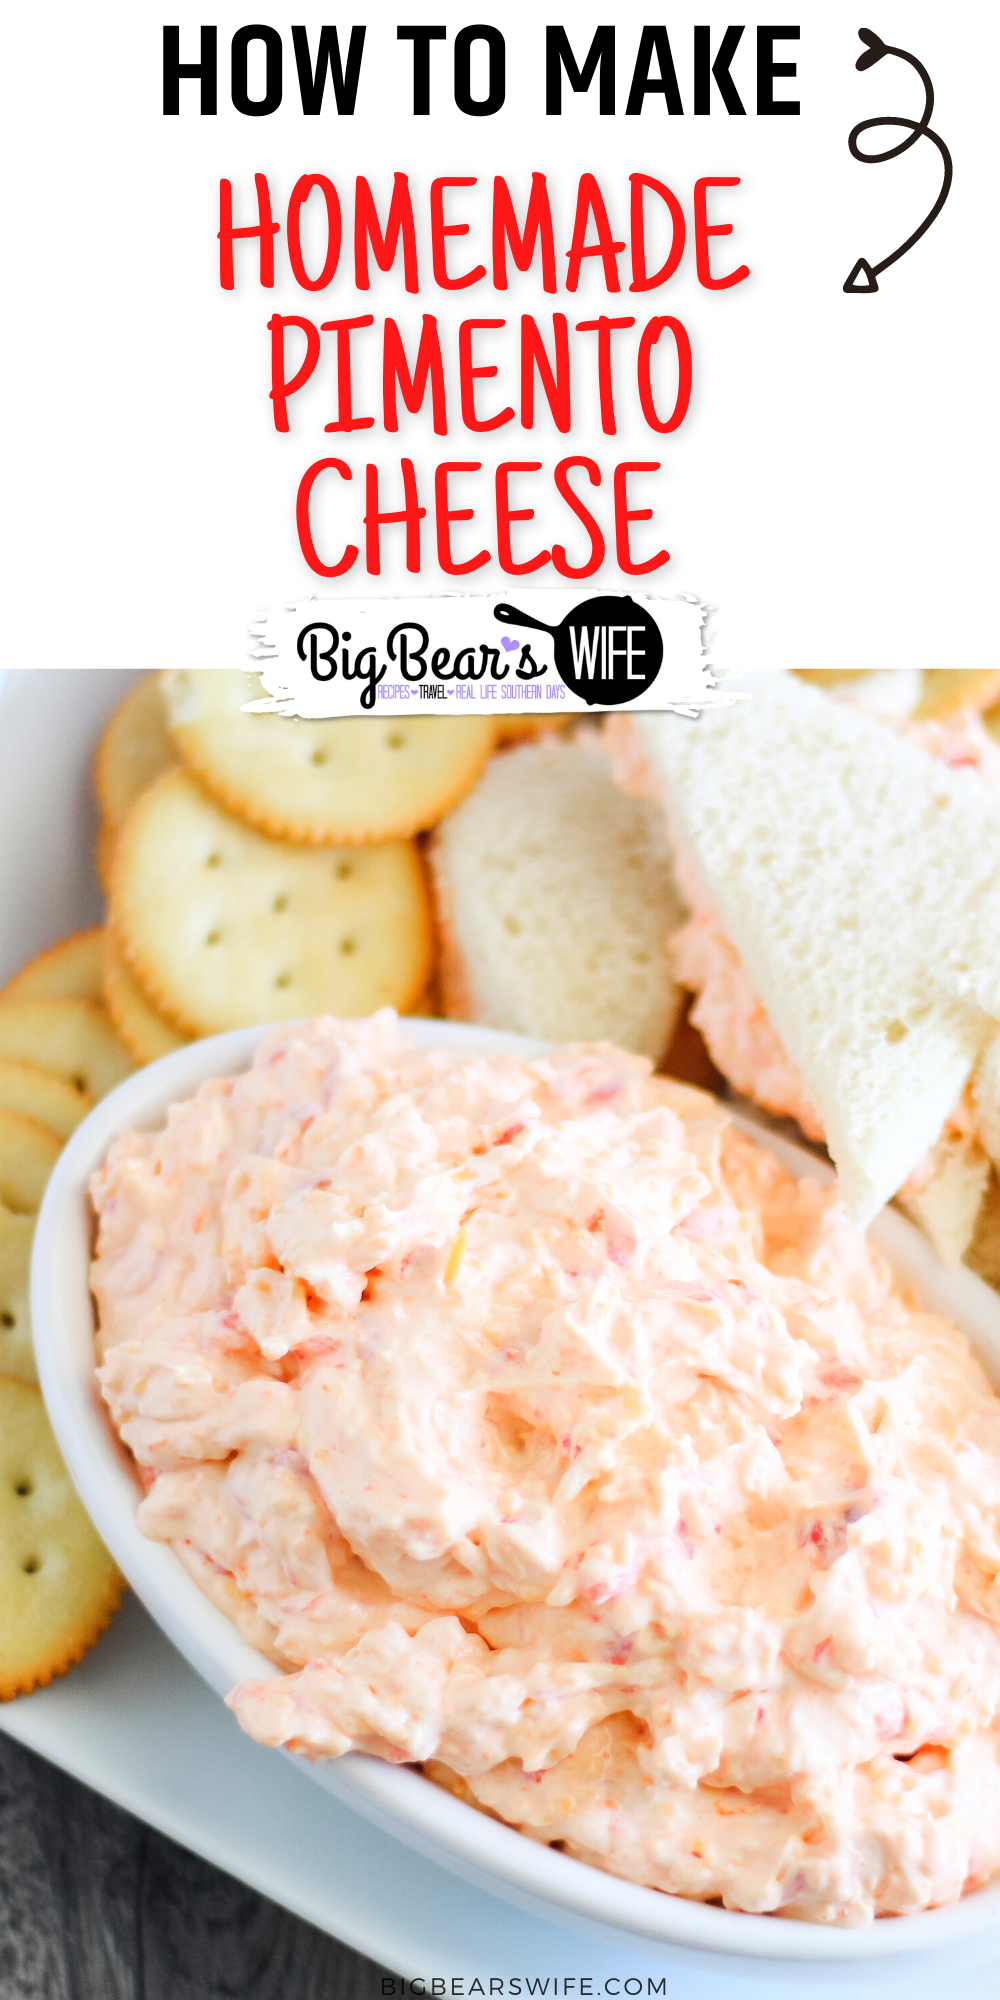 Homemade Southern Pimento Cheese is super easy to make at home! This recipe is a combination of a recipe from my grandmother's recipe box and my own twist. It's our favorite pimento cheese recipe!  via @bigbearswife